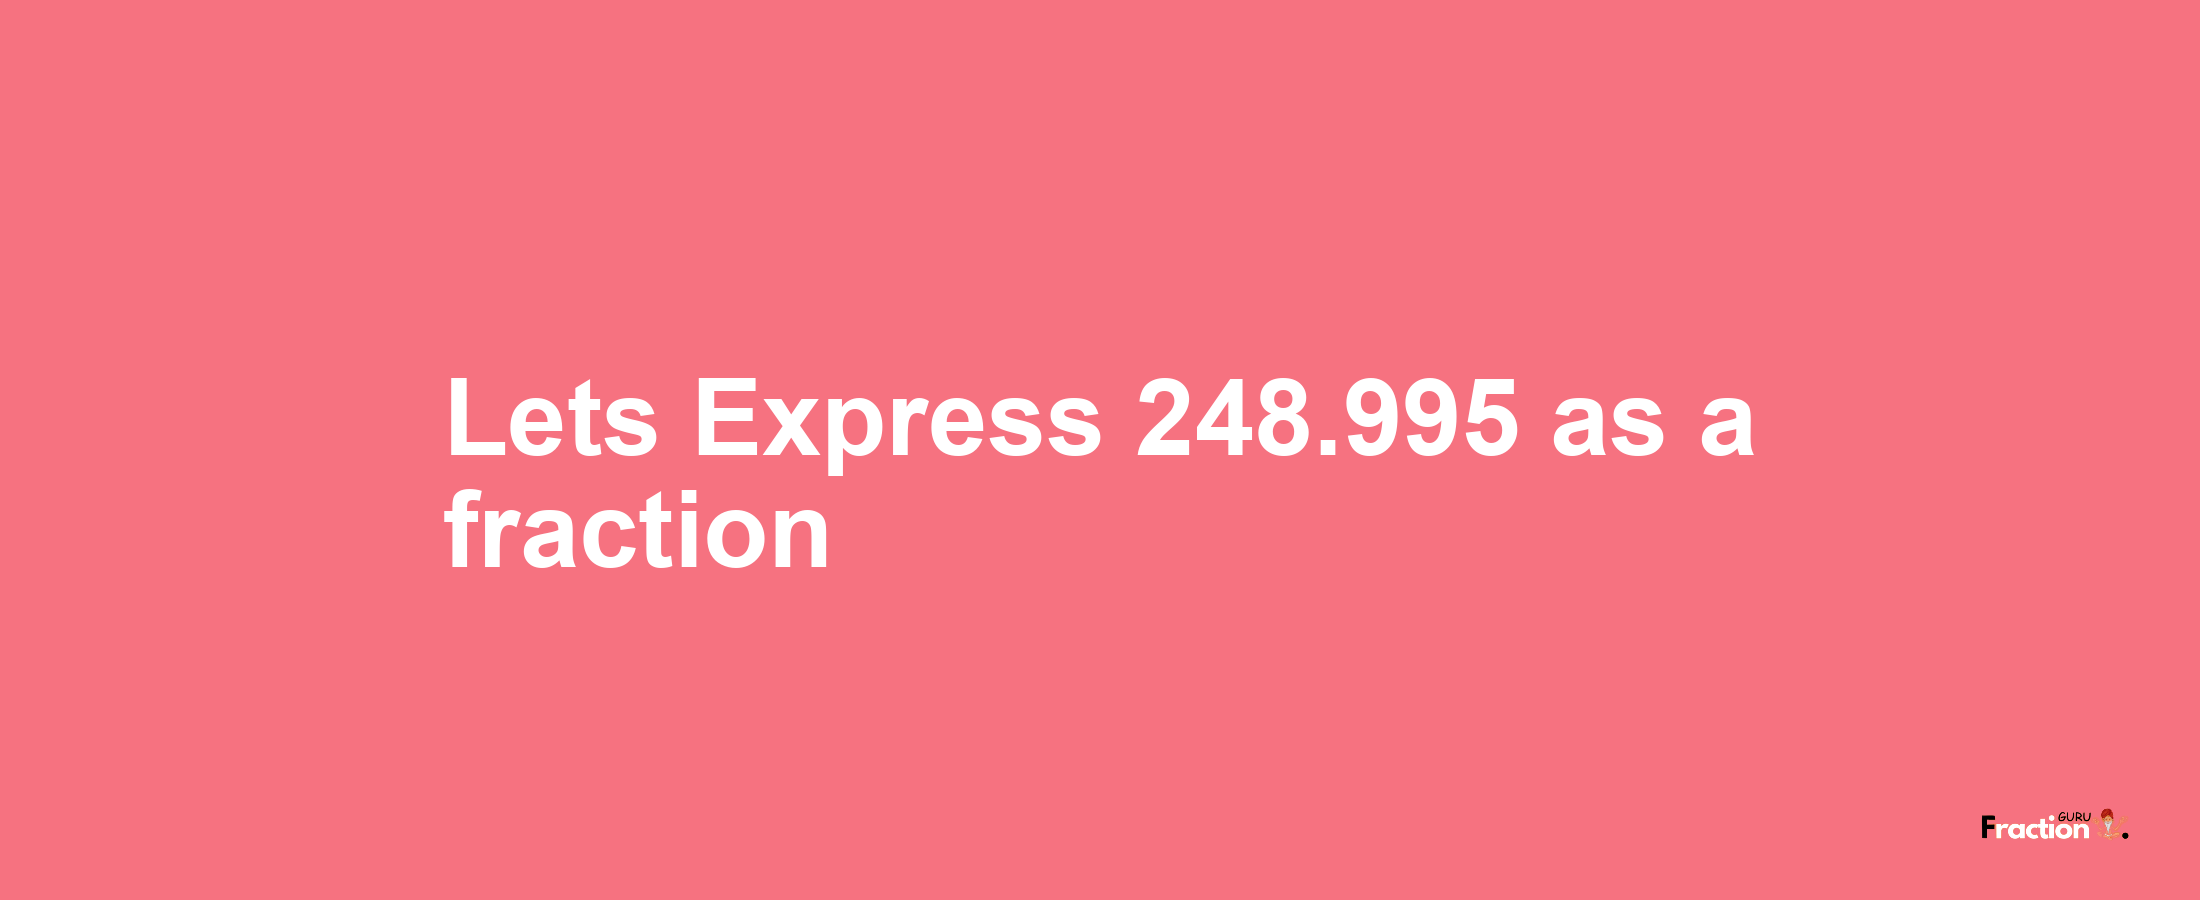 Lets Express 248.995 as afraction